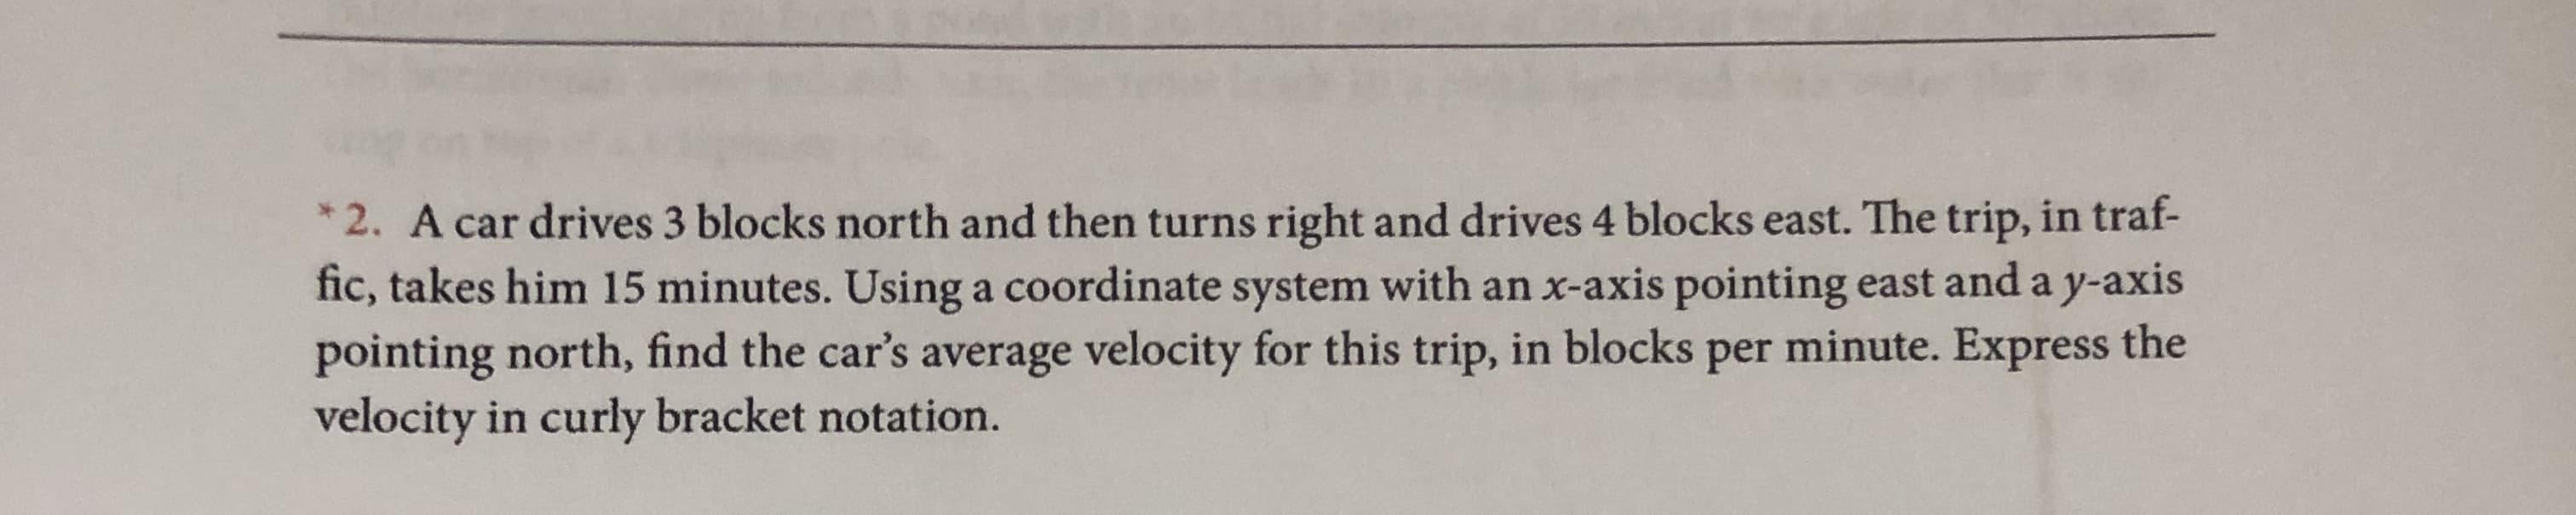 *2. A car drives 3 blocks north and then turns right and drives 4 blocks east. The trip, in traf-
fic, takes him 15 minutes. Using a coordinate system with an x-axis pointing east and a y-axis
pointing north, find the car's average velocity for this trip, in blocks per minute. Express the
velocity in curly bracket notation.
